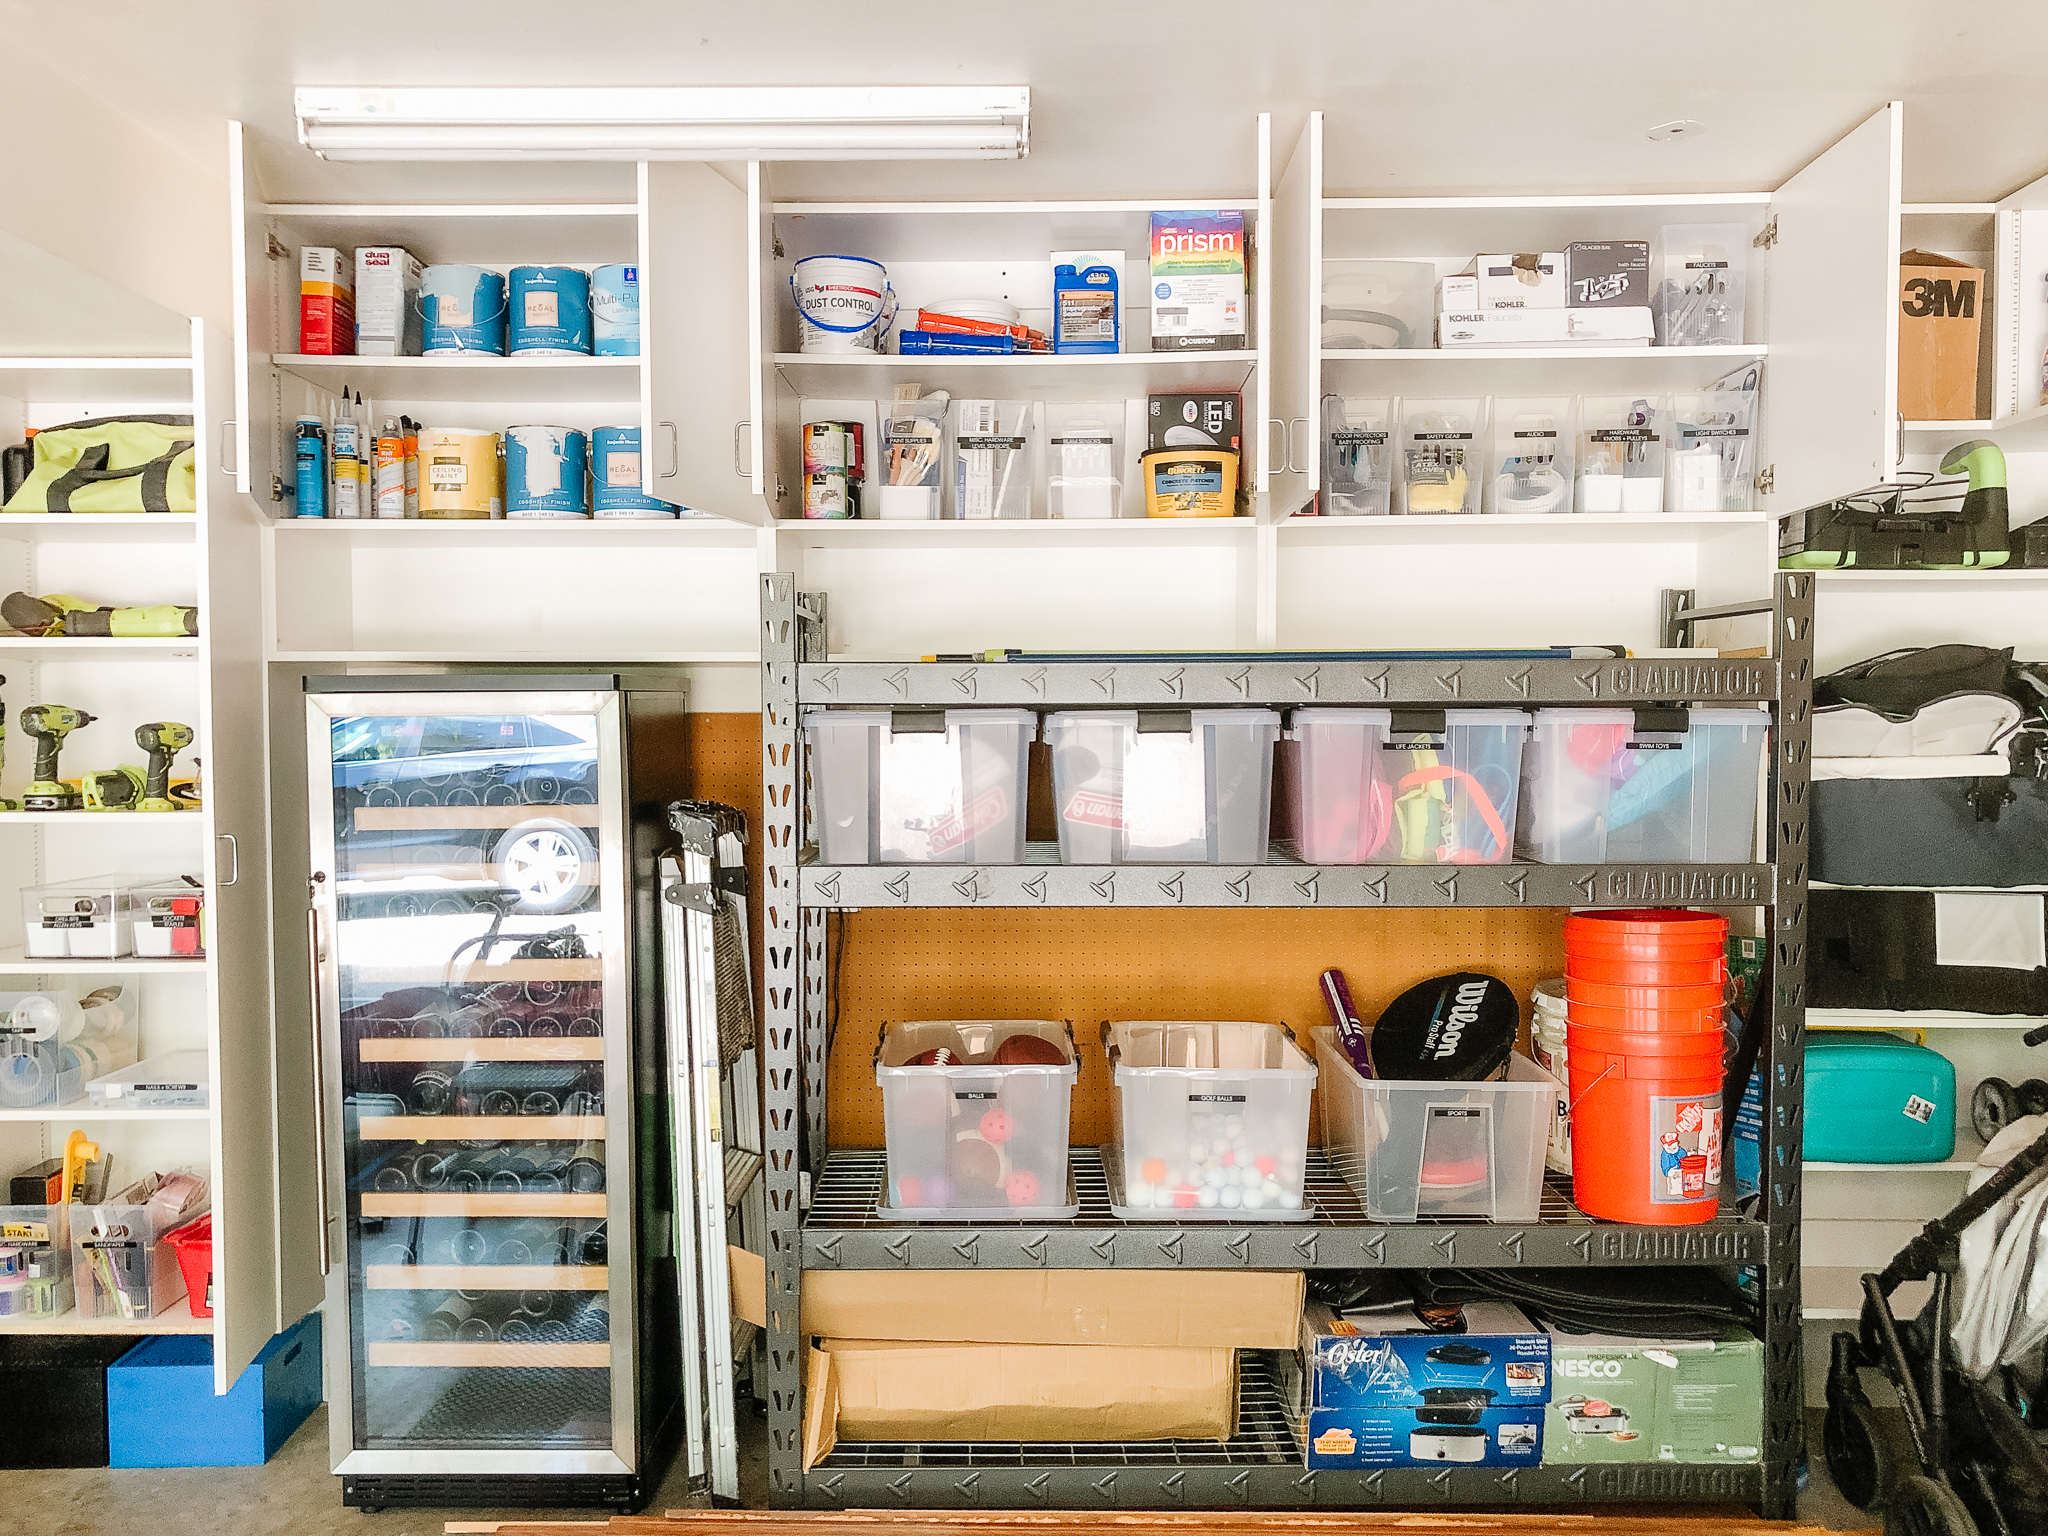 You can create an organized closet with this Rubbermaid Fast Track